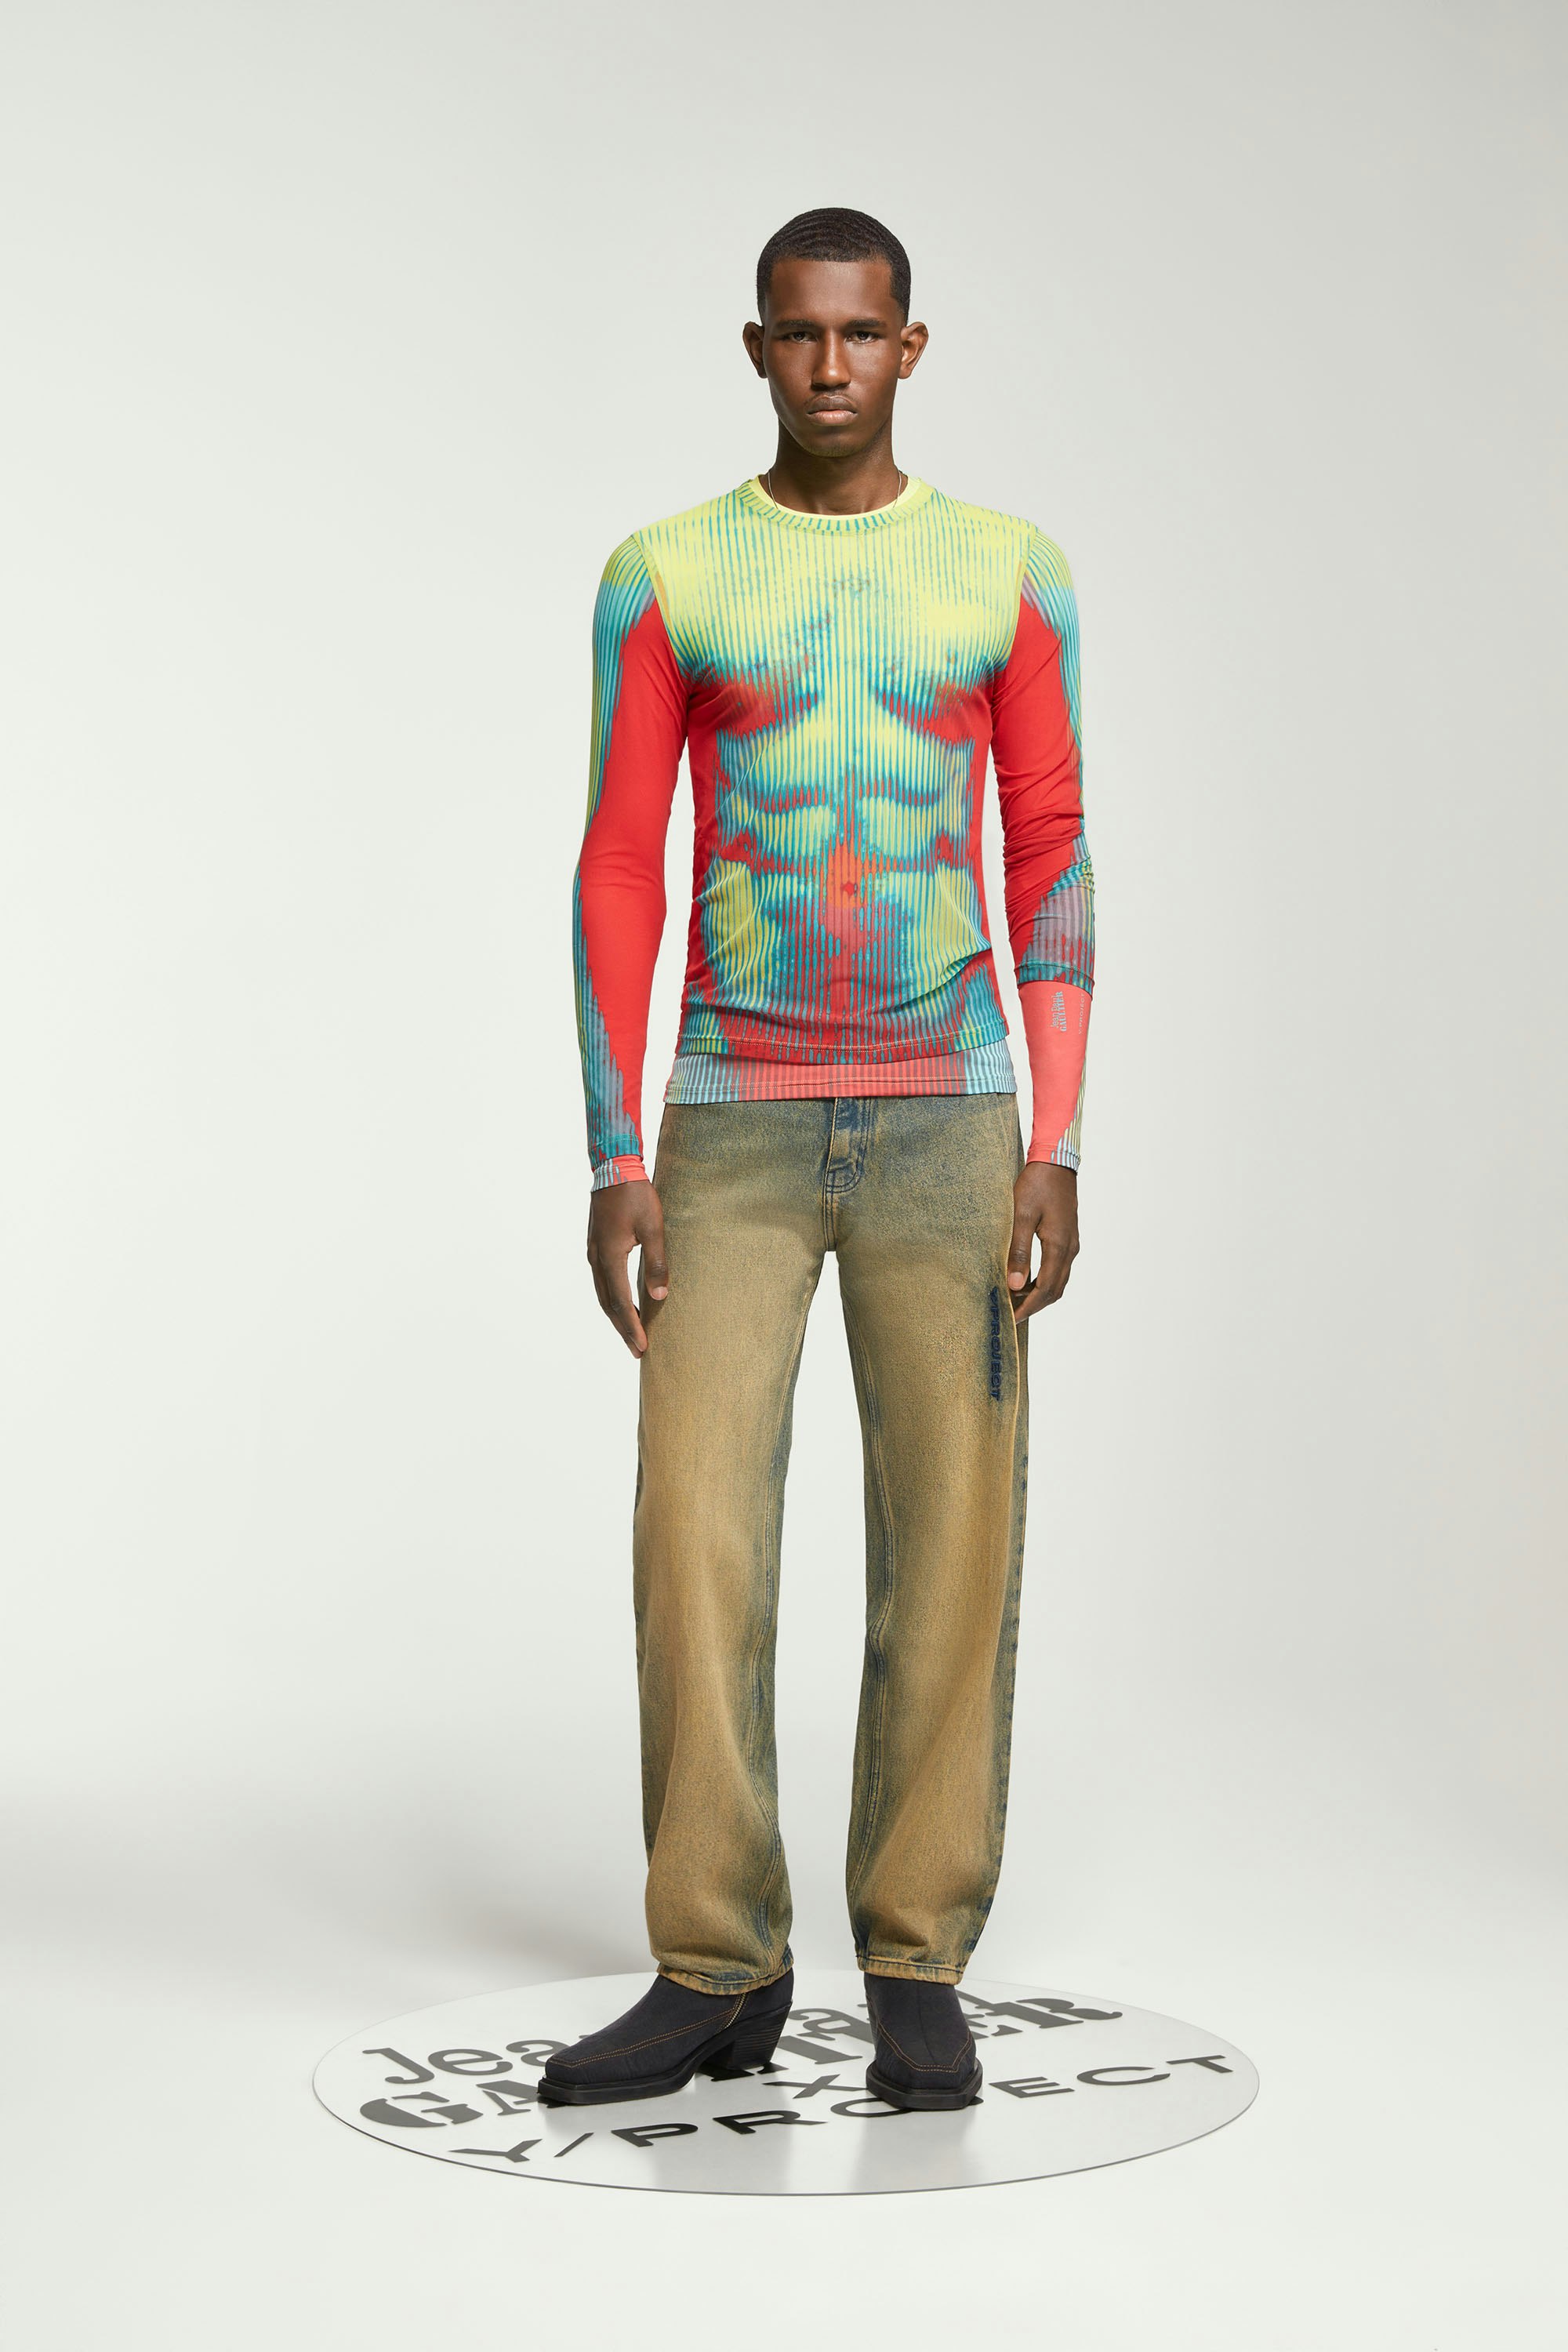 The Green & Red Body Morph Top by Jean Paul Gaultier x Y/Project